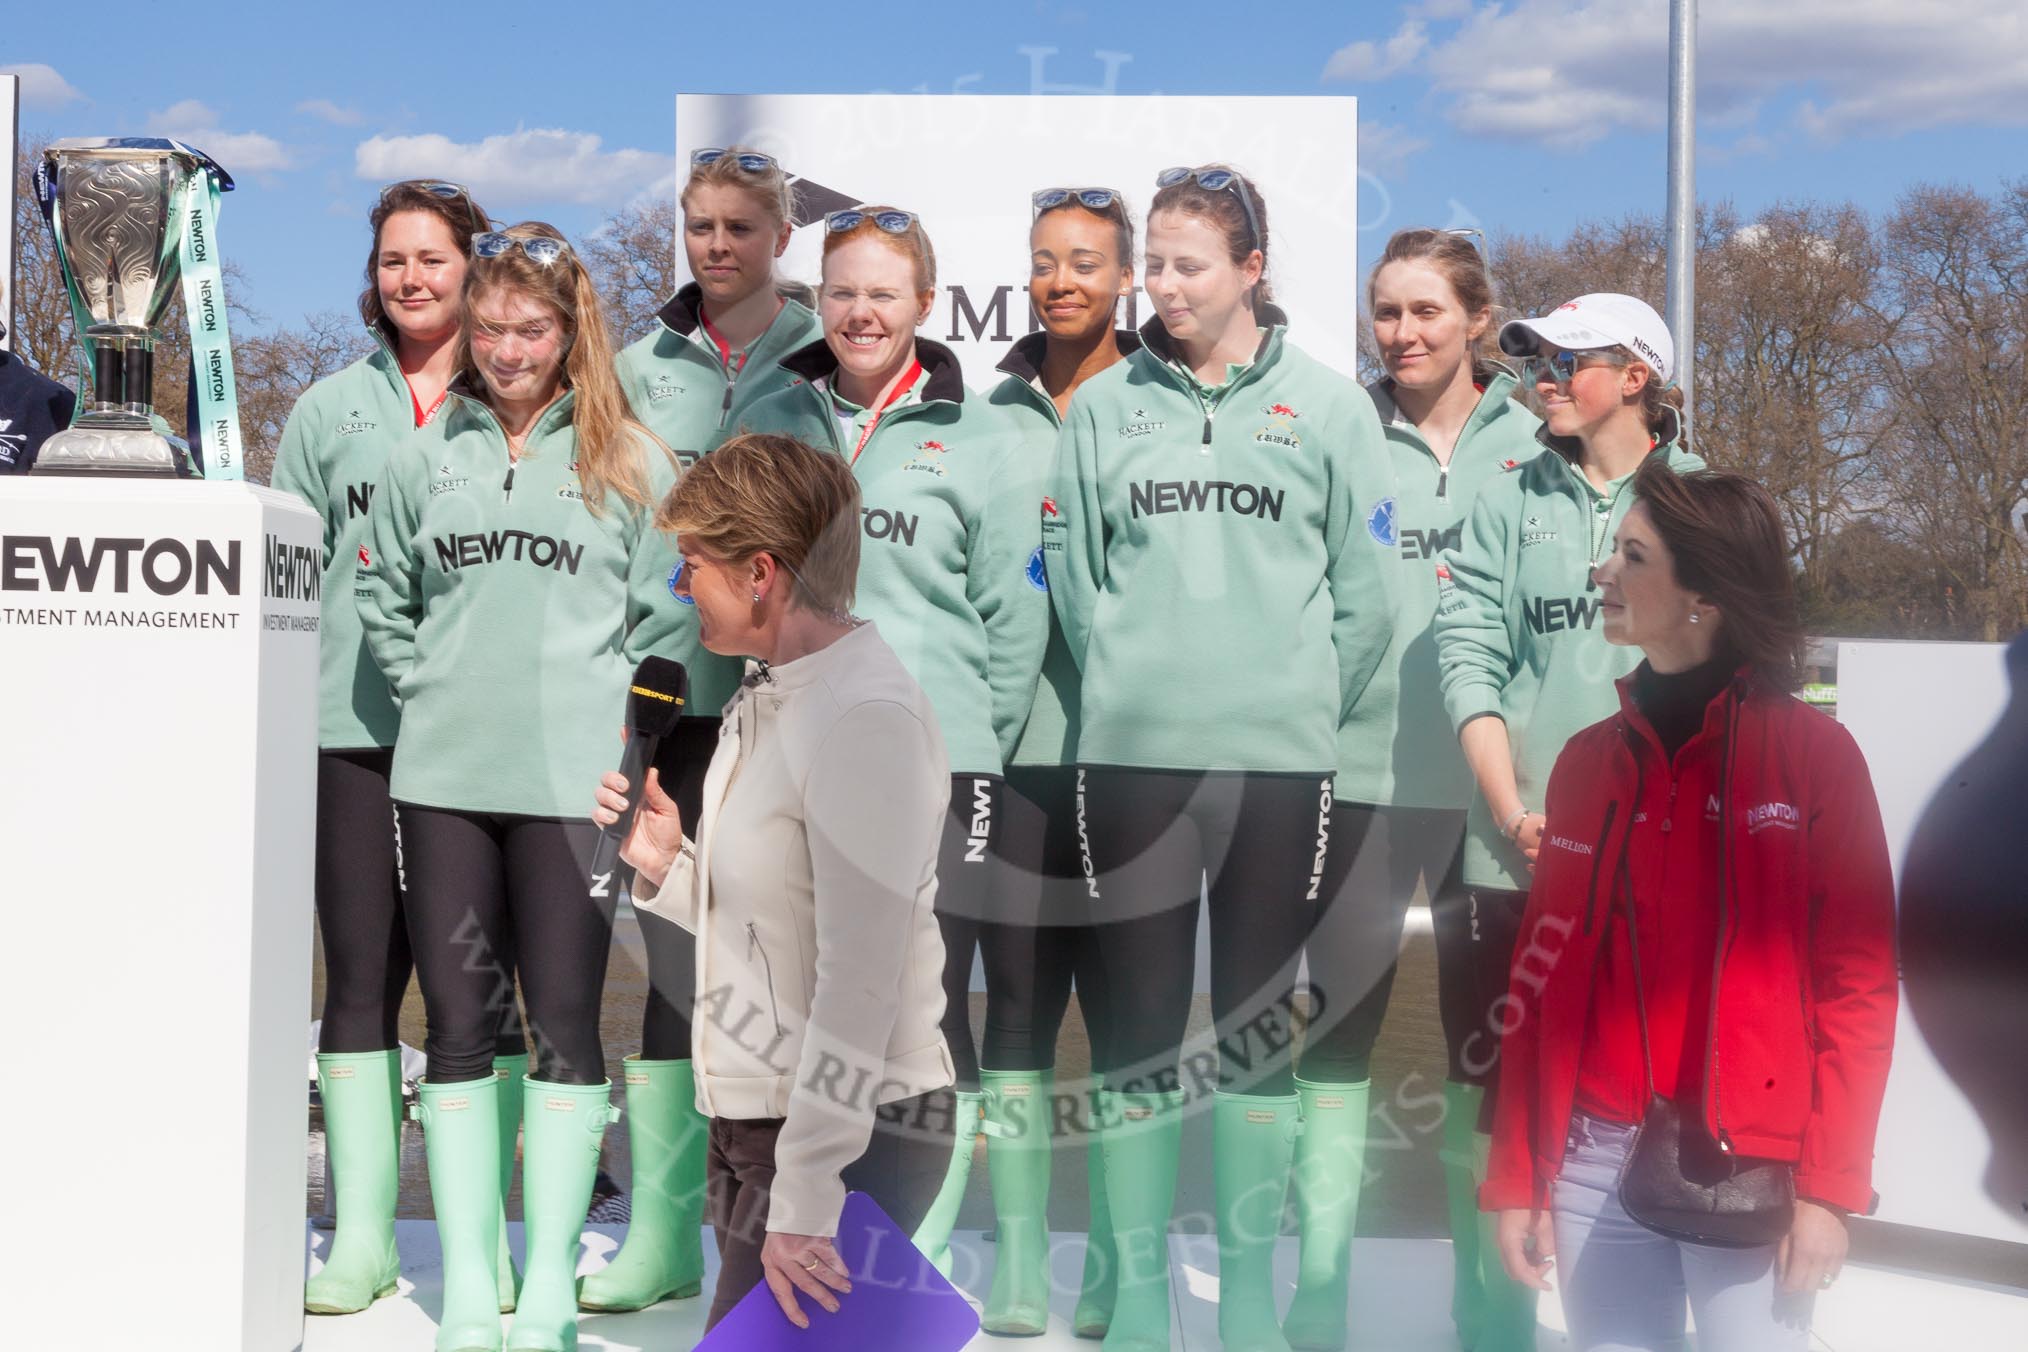 The Boat Race season 2015 - Newton Women's Boat Race.
River Thames between Putney and Mortlake,
London,

United Kingdom,
on 11 April 2015 at 15:01, image #46